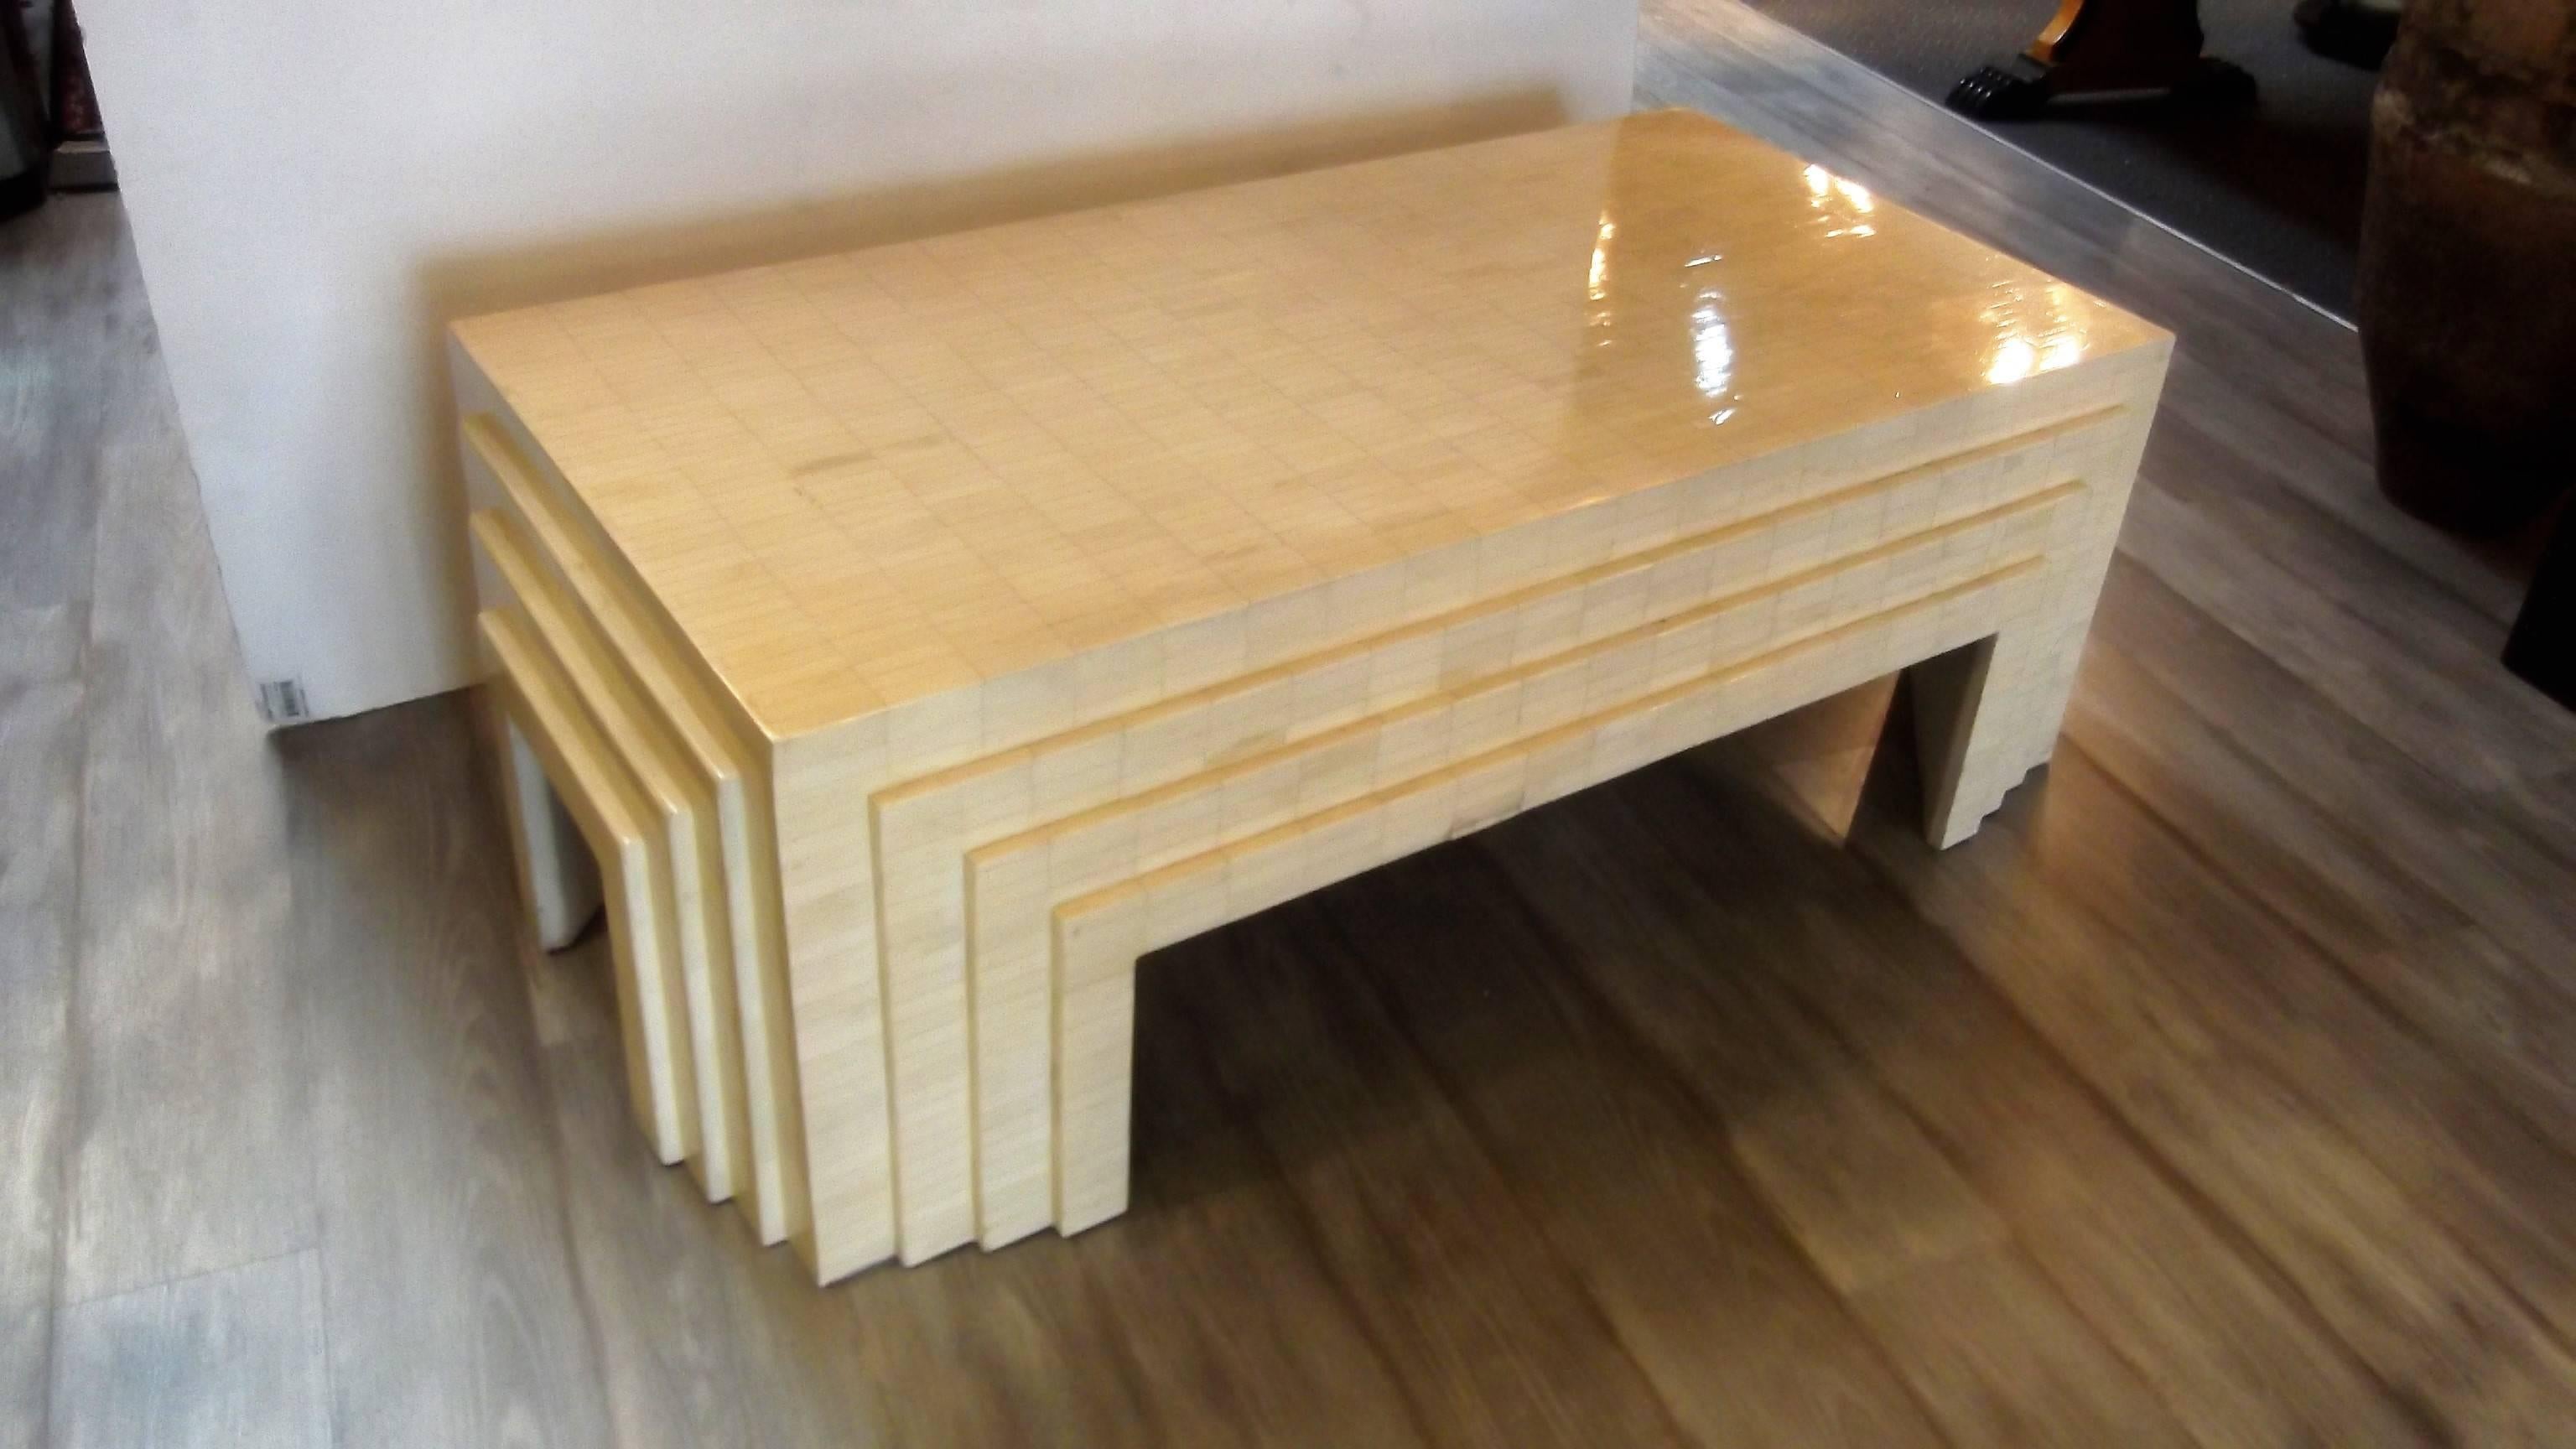 A Mid-Century modern design coffee table in the manner of Karl Springer. The entire surface is covered in mini subway bone tiles. The front, back and sides have a cityscape step design giving this table high style and dimension.